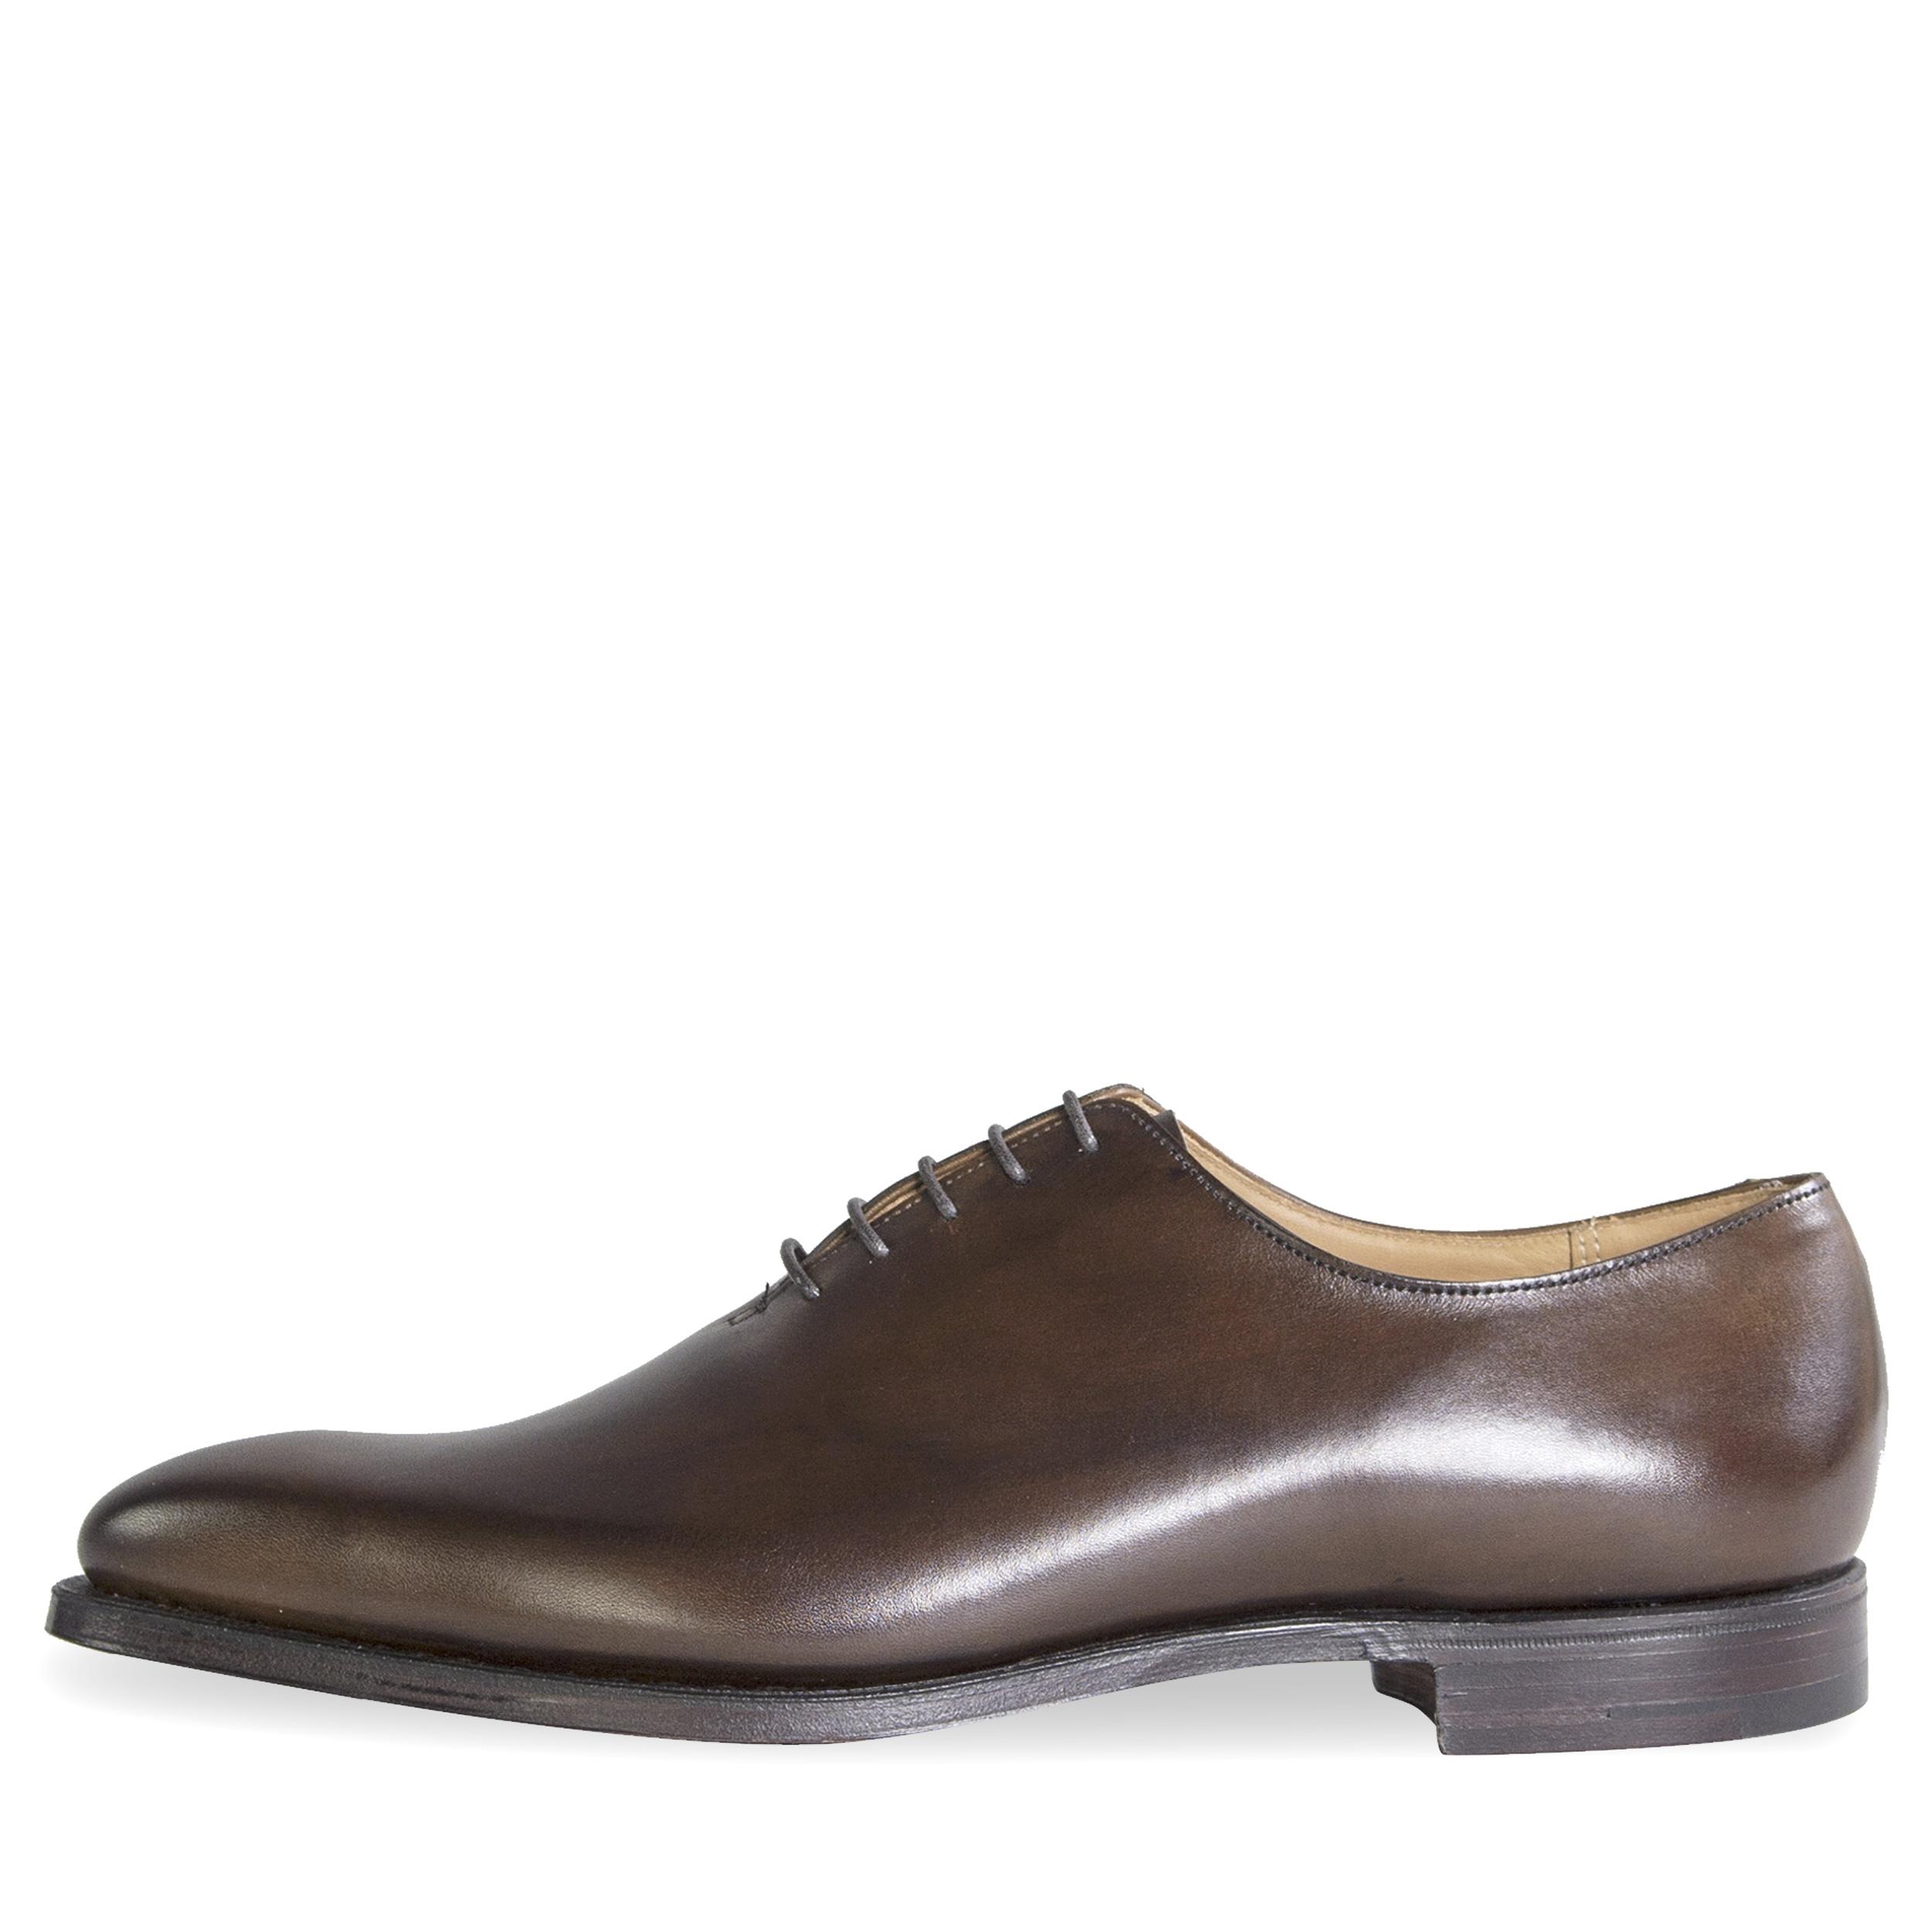 Crockett and Jones 'alex' Burnished Calf Leather Shoes Brown for Men ...